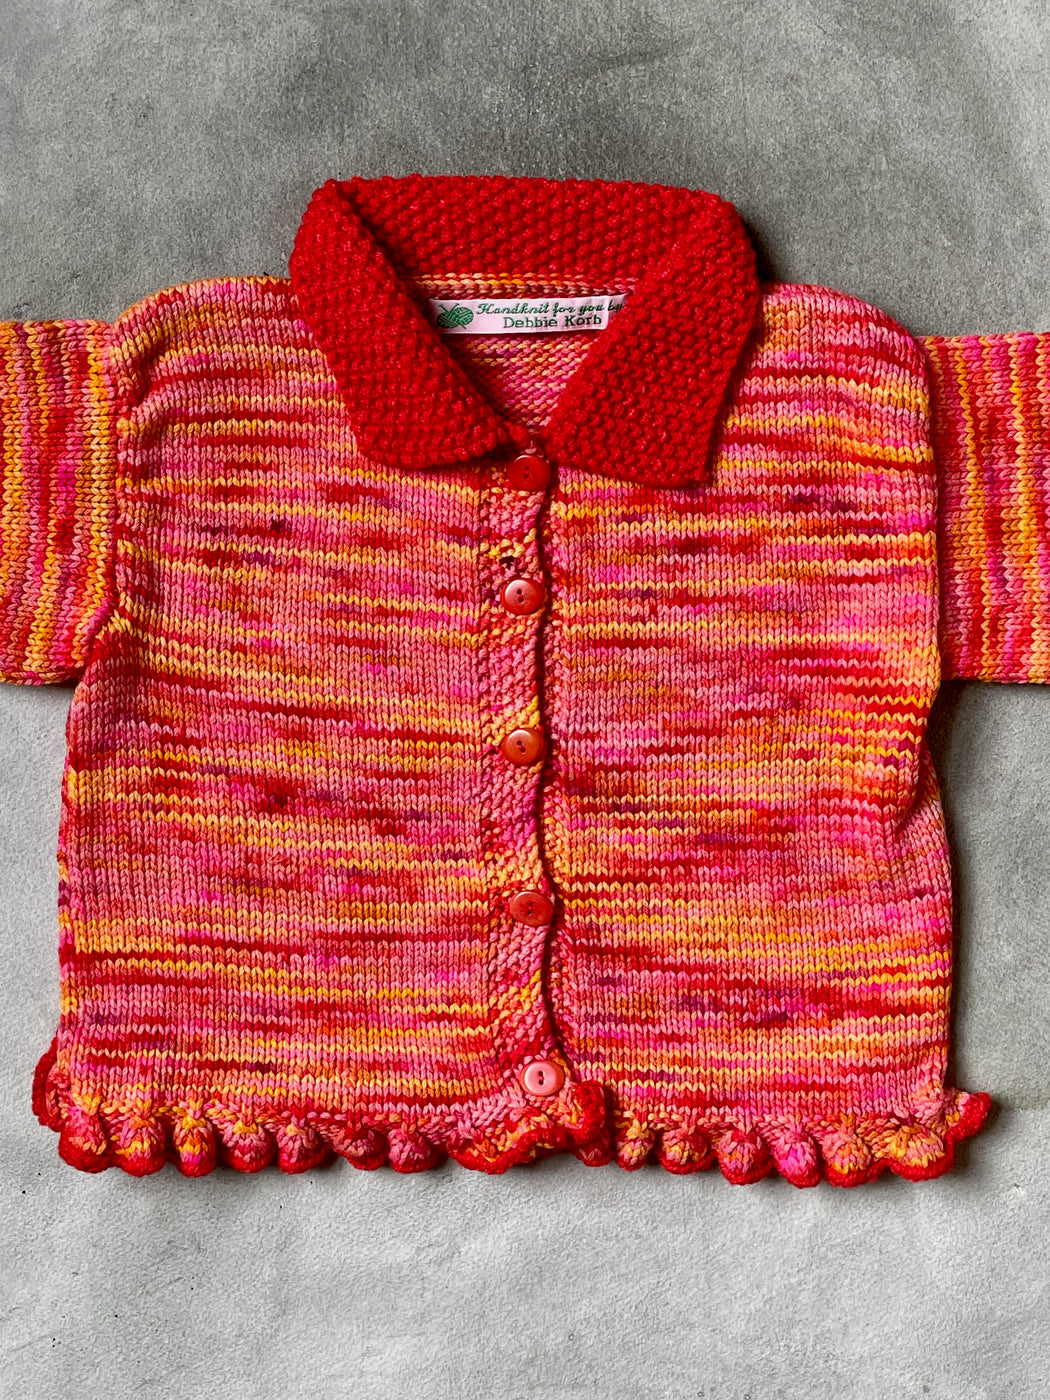 Aunt Debbie's Hand-Knit Ruffled Child's Sweater (2-3 years)